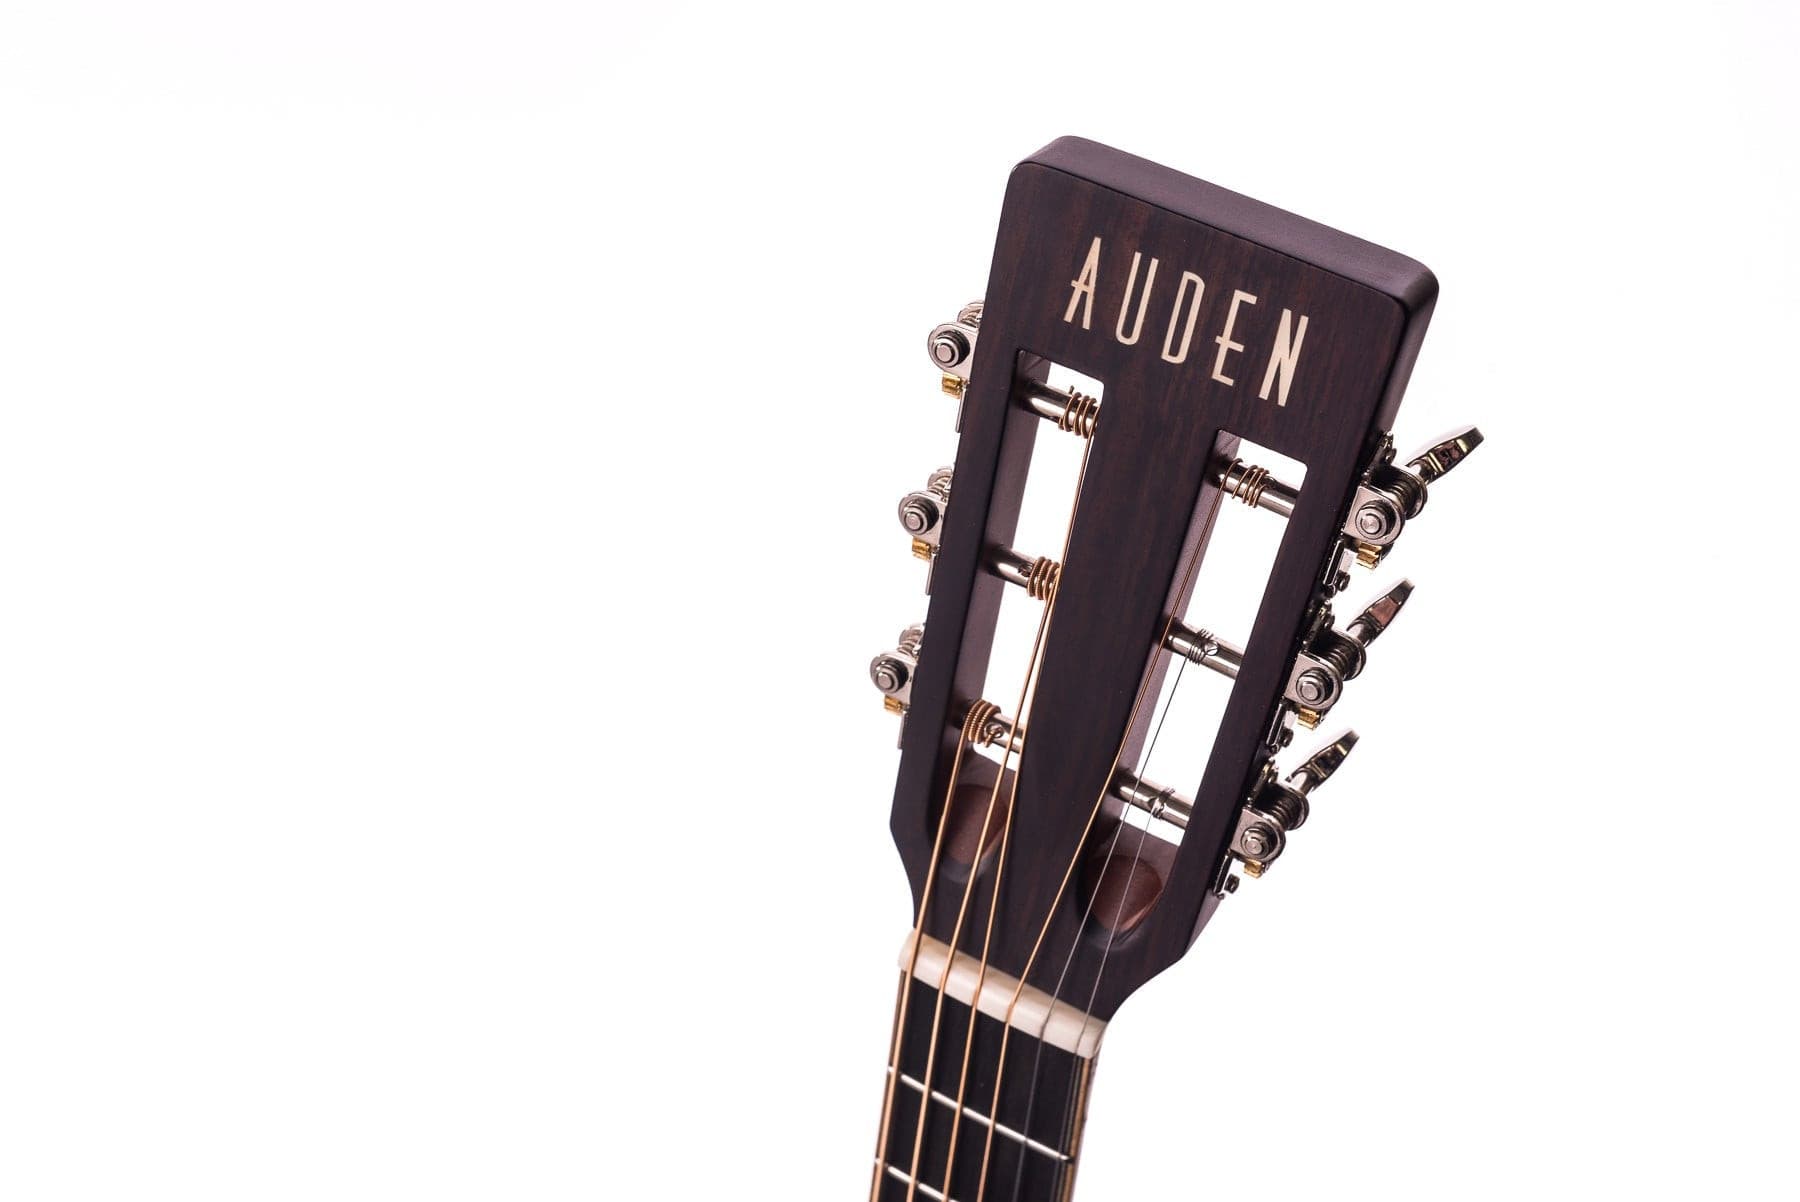 Auden Tobacco Emily Rose, Electro Acoustic Guitar for sale at Richards Guitars.